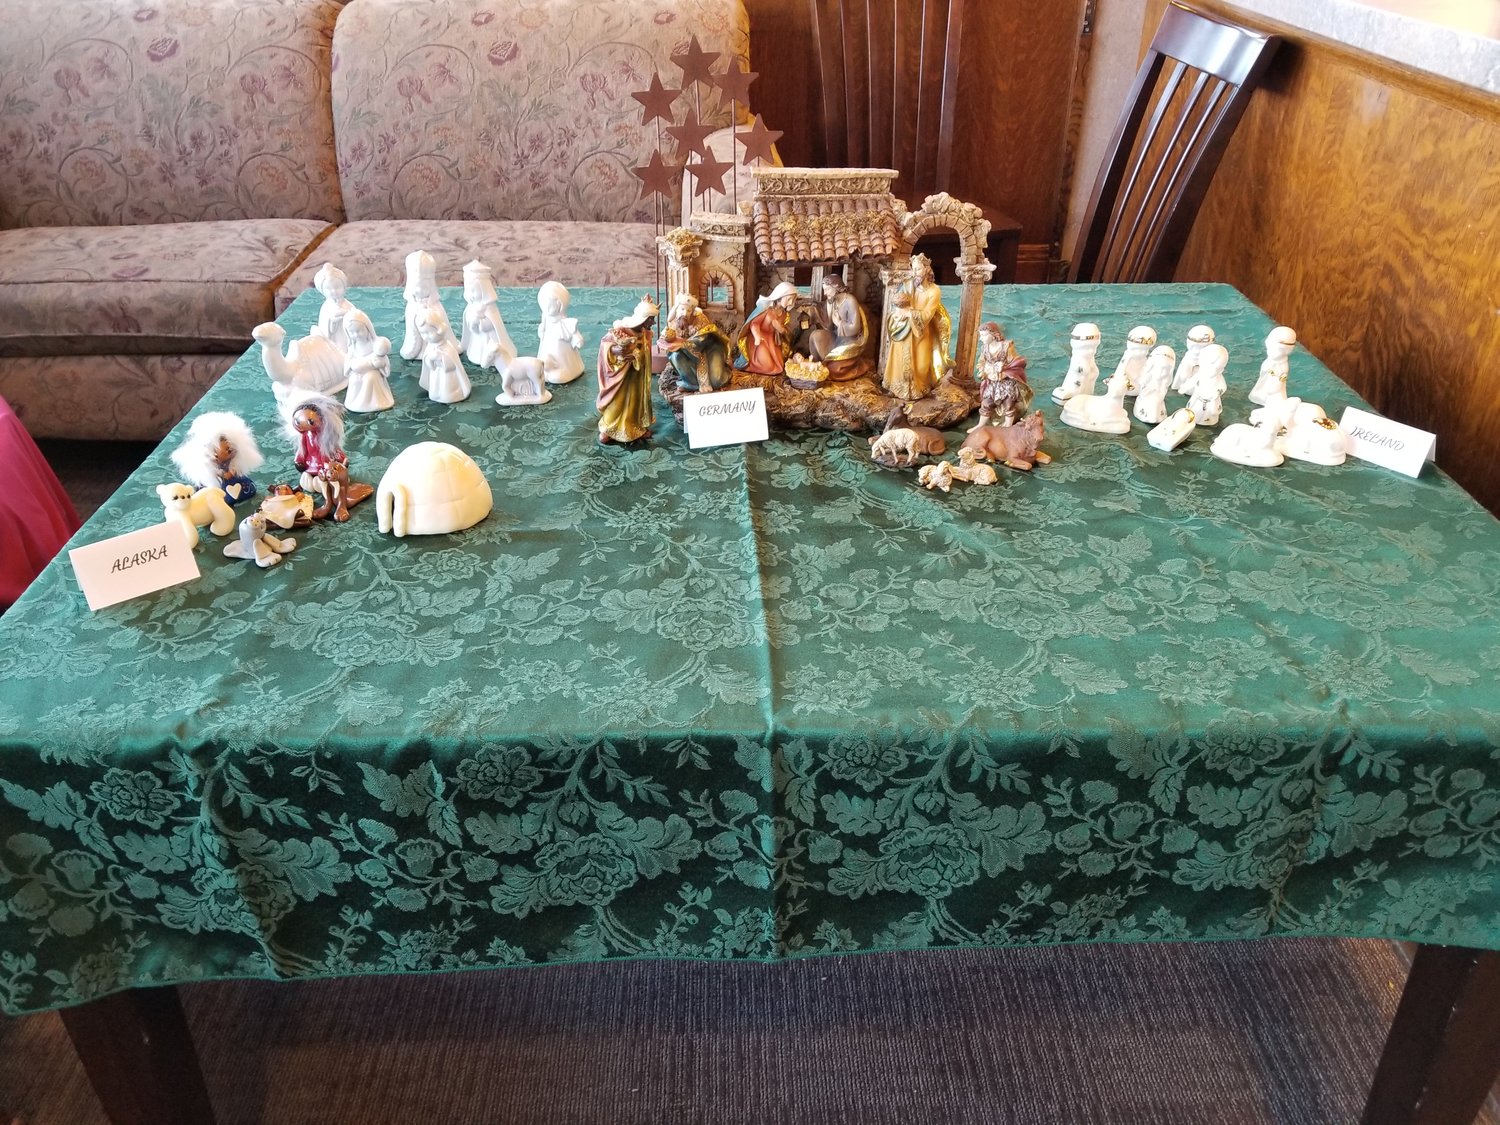 Nativity scenes from around the world were on display inside The Third Place.  These carved wood sets were among many different types displayed on tables and the near life-size set was produced in 1957.